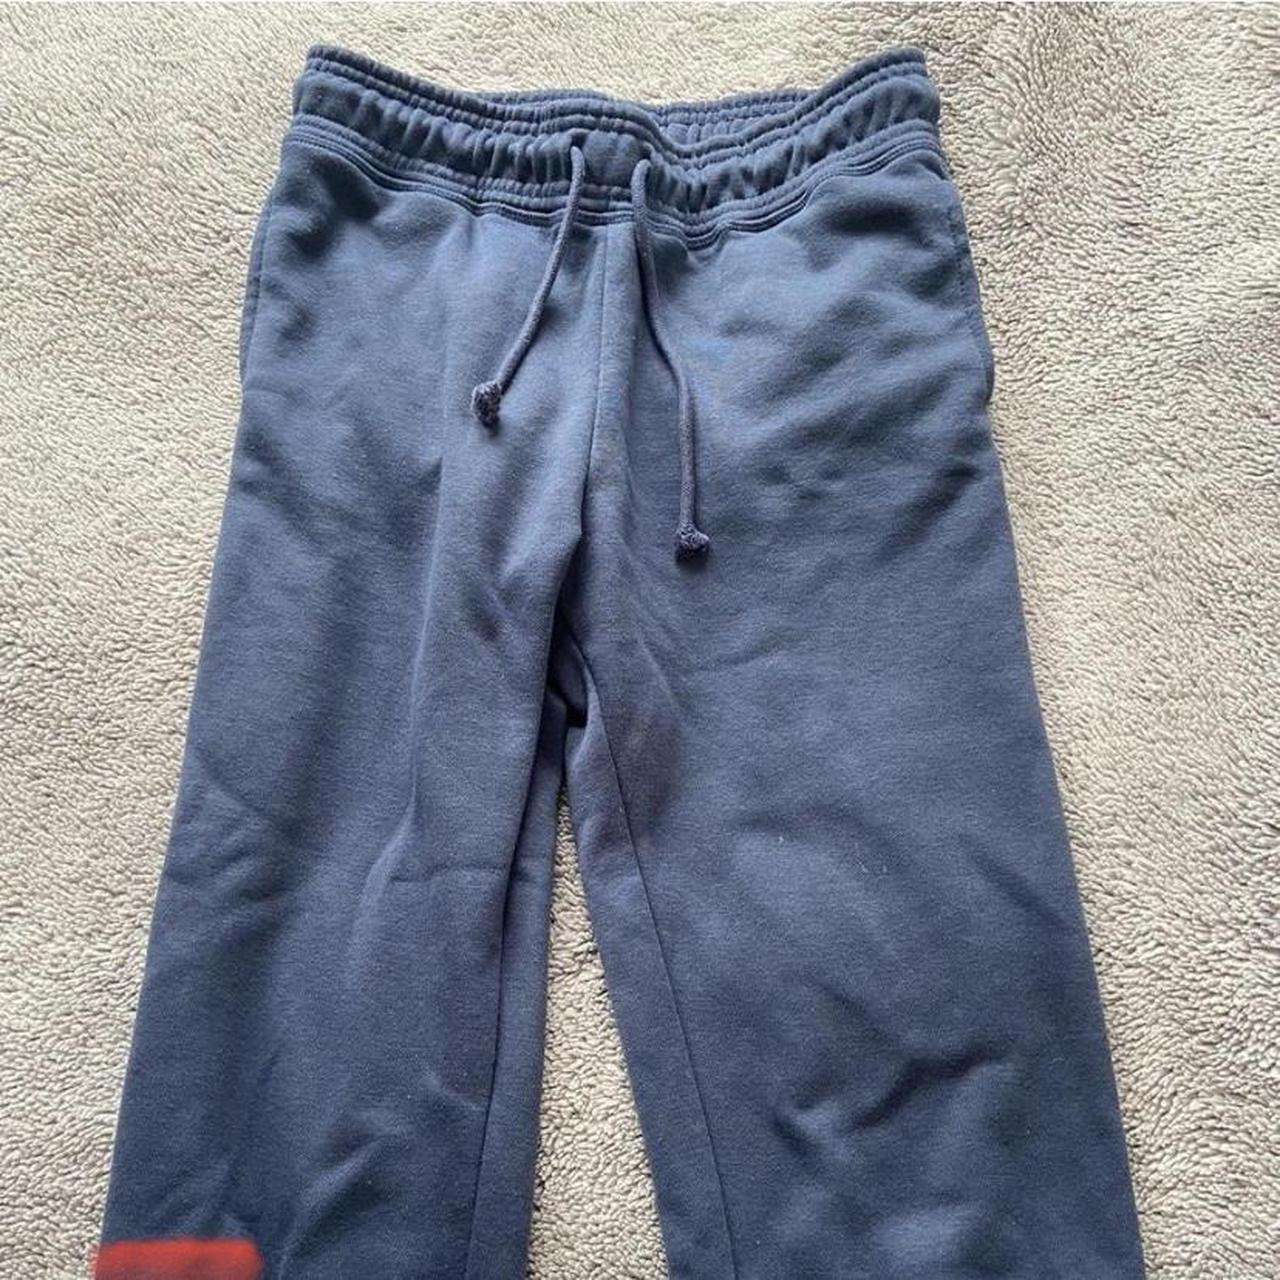 brand new without tags primark blue joggers, never... - Depop